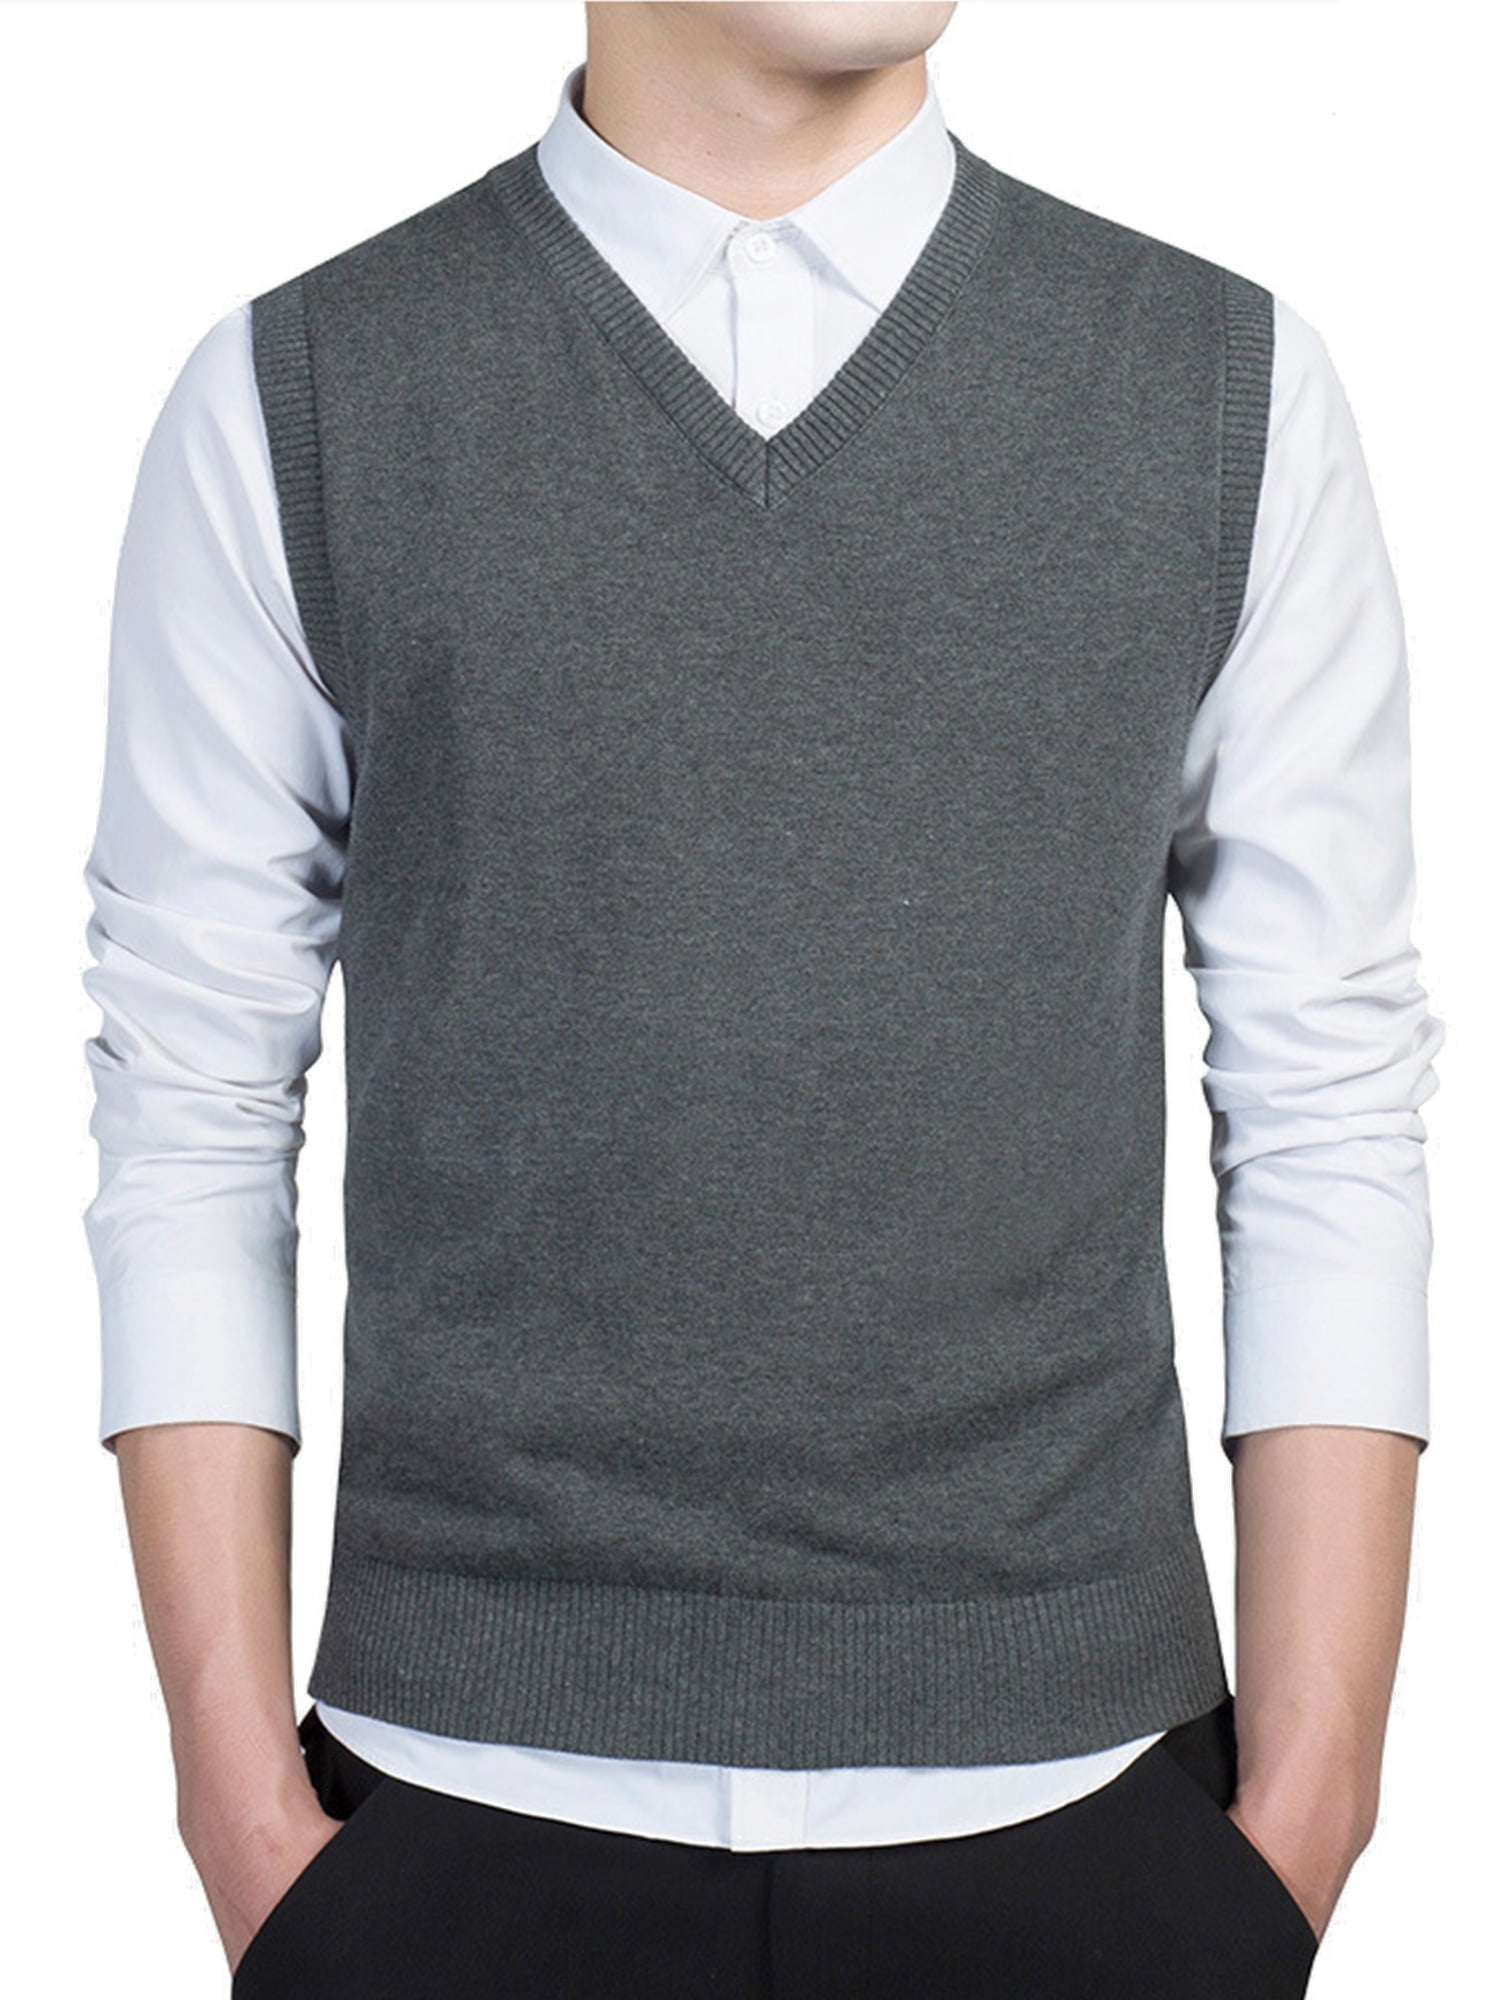 COOFANDY Men's Sweater Vest V Neck Casual Sleeveless Knitted Button ...